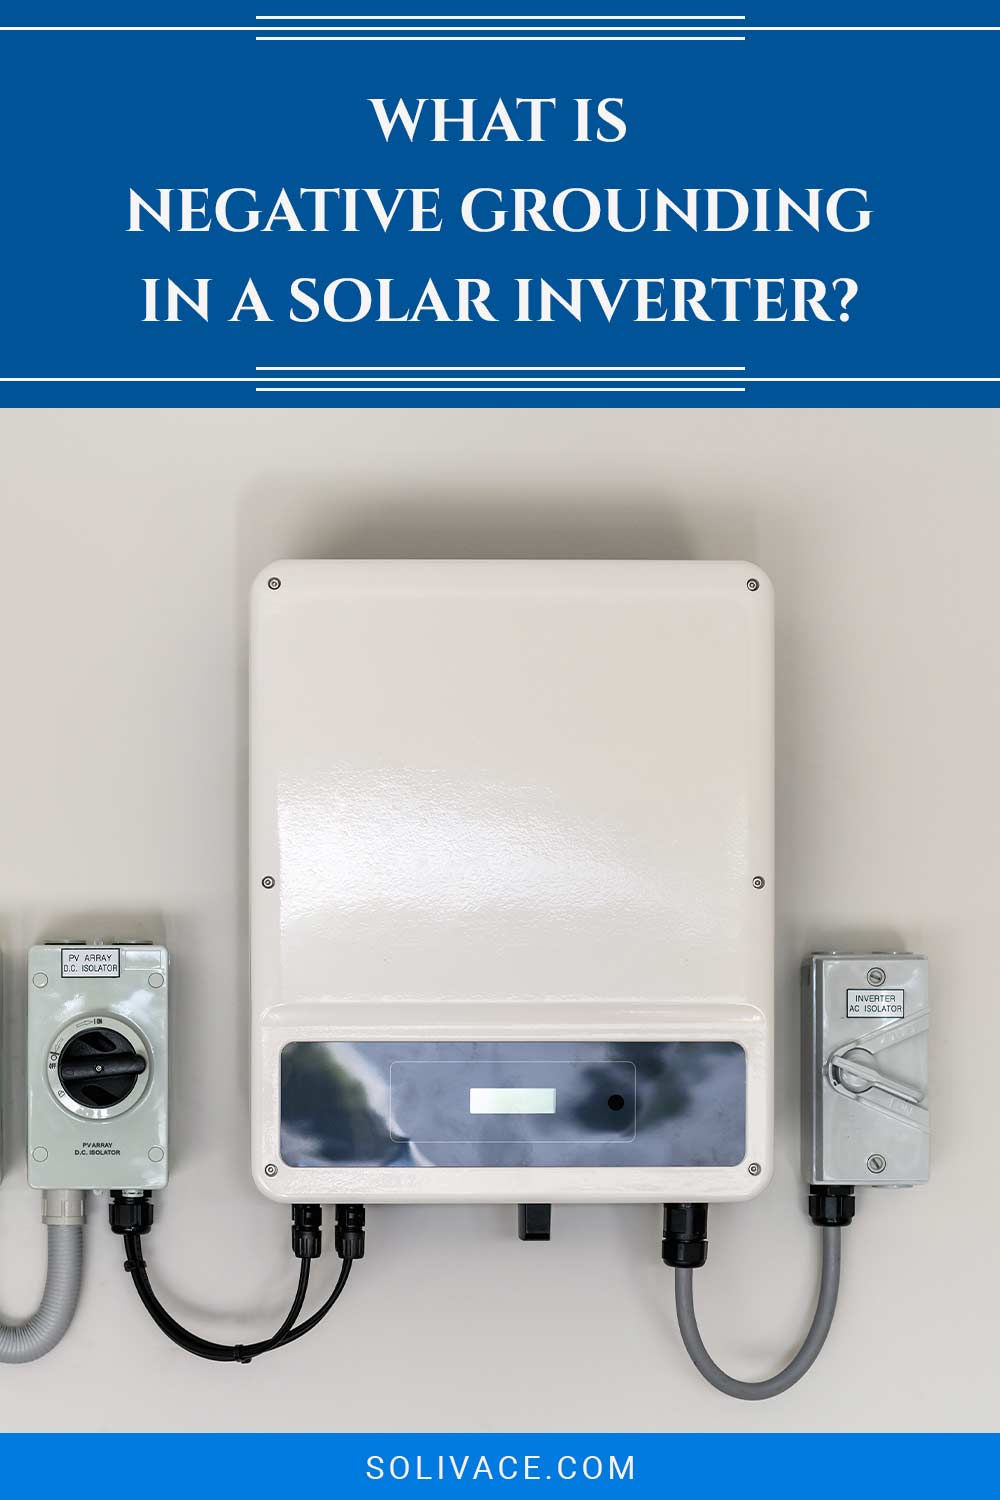 What Is Negative Grounding In a Solar Inverter?